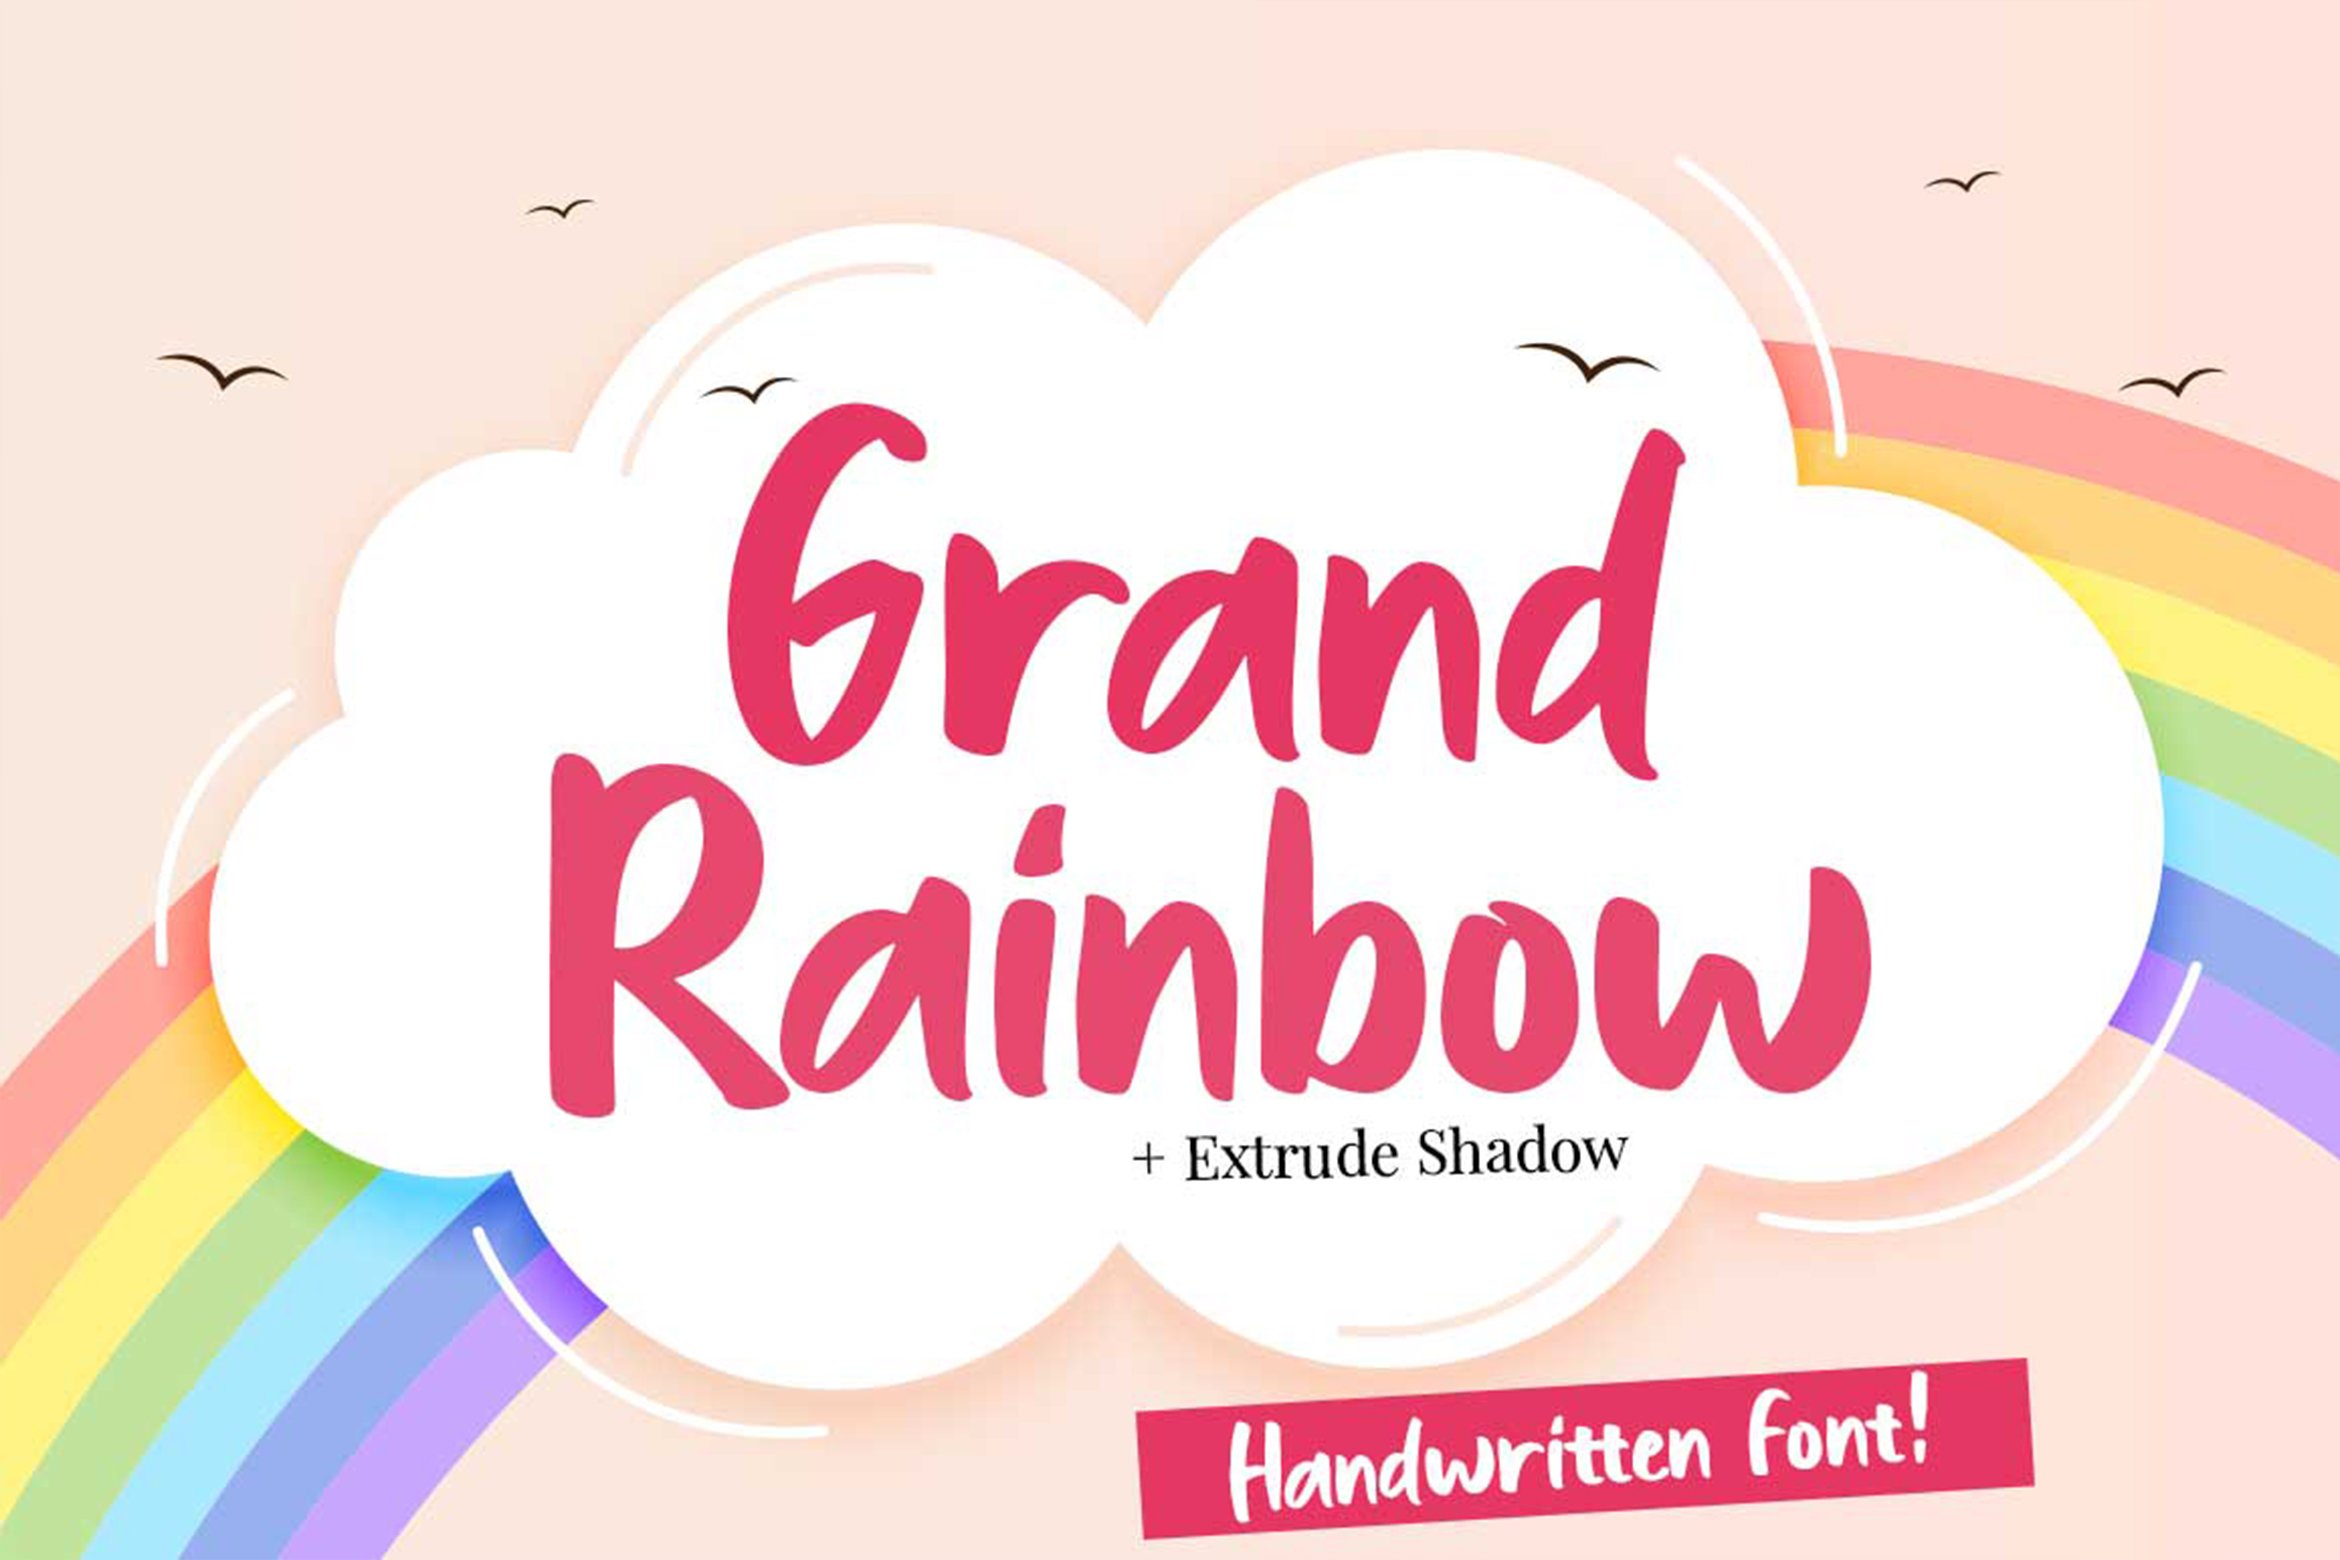 Grand Rainbow + Extrude Shadow cover image.